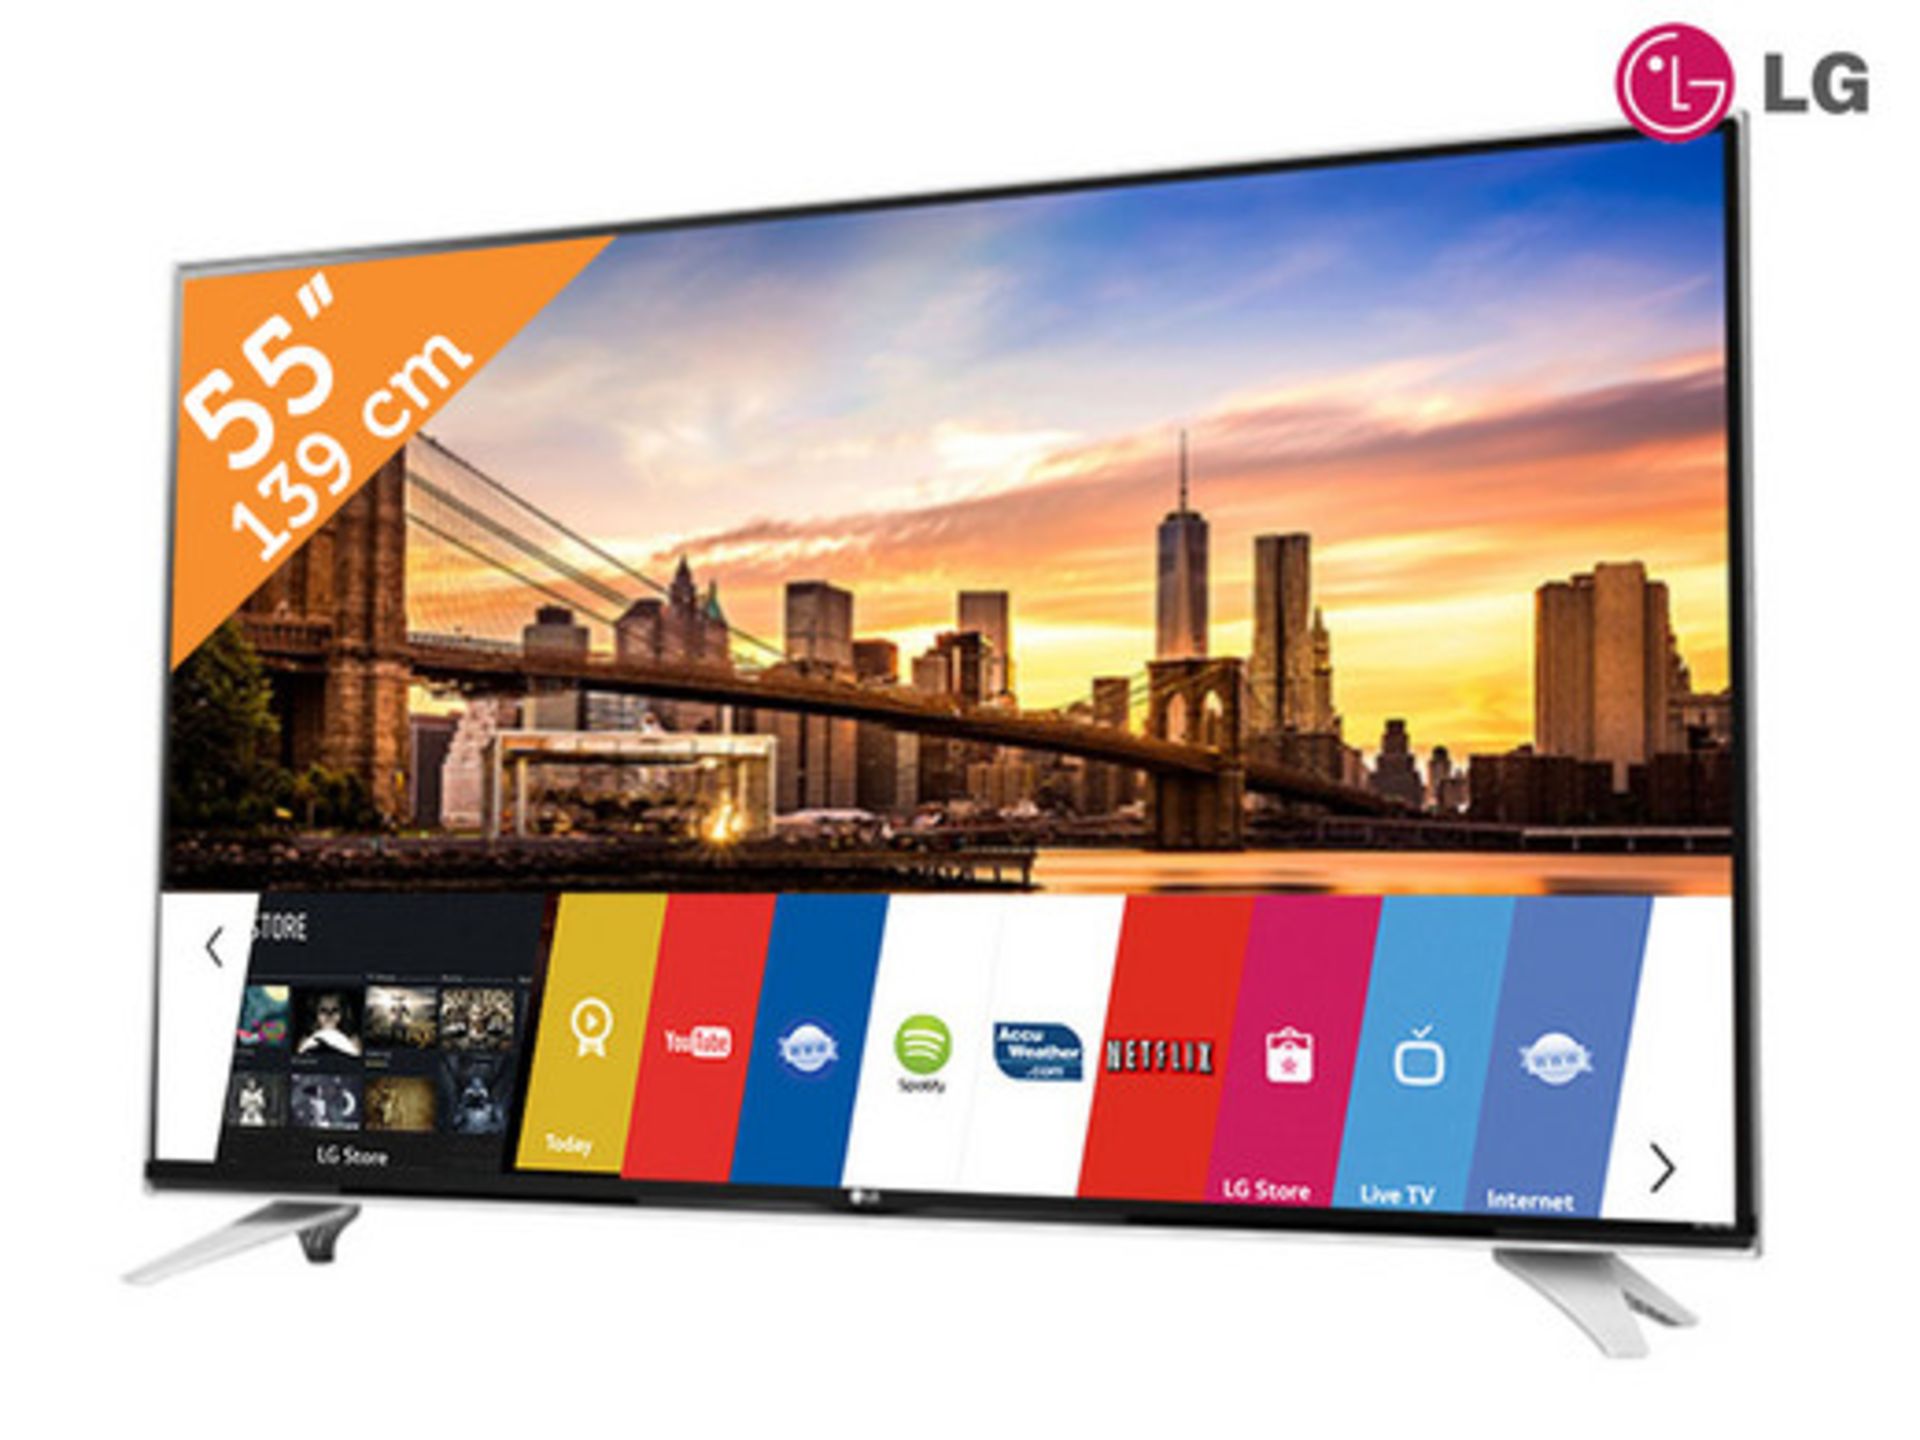 V Grade A LG 55 Inch 4K ULTRA HD LED SMART TV WITH FREEVIEW HD & WEBOS & WIFI 55UF840V